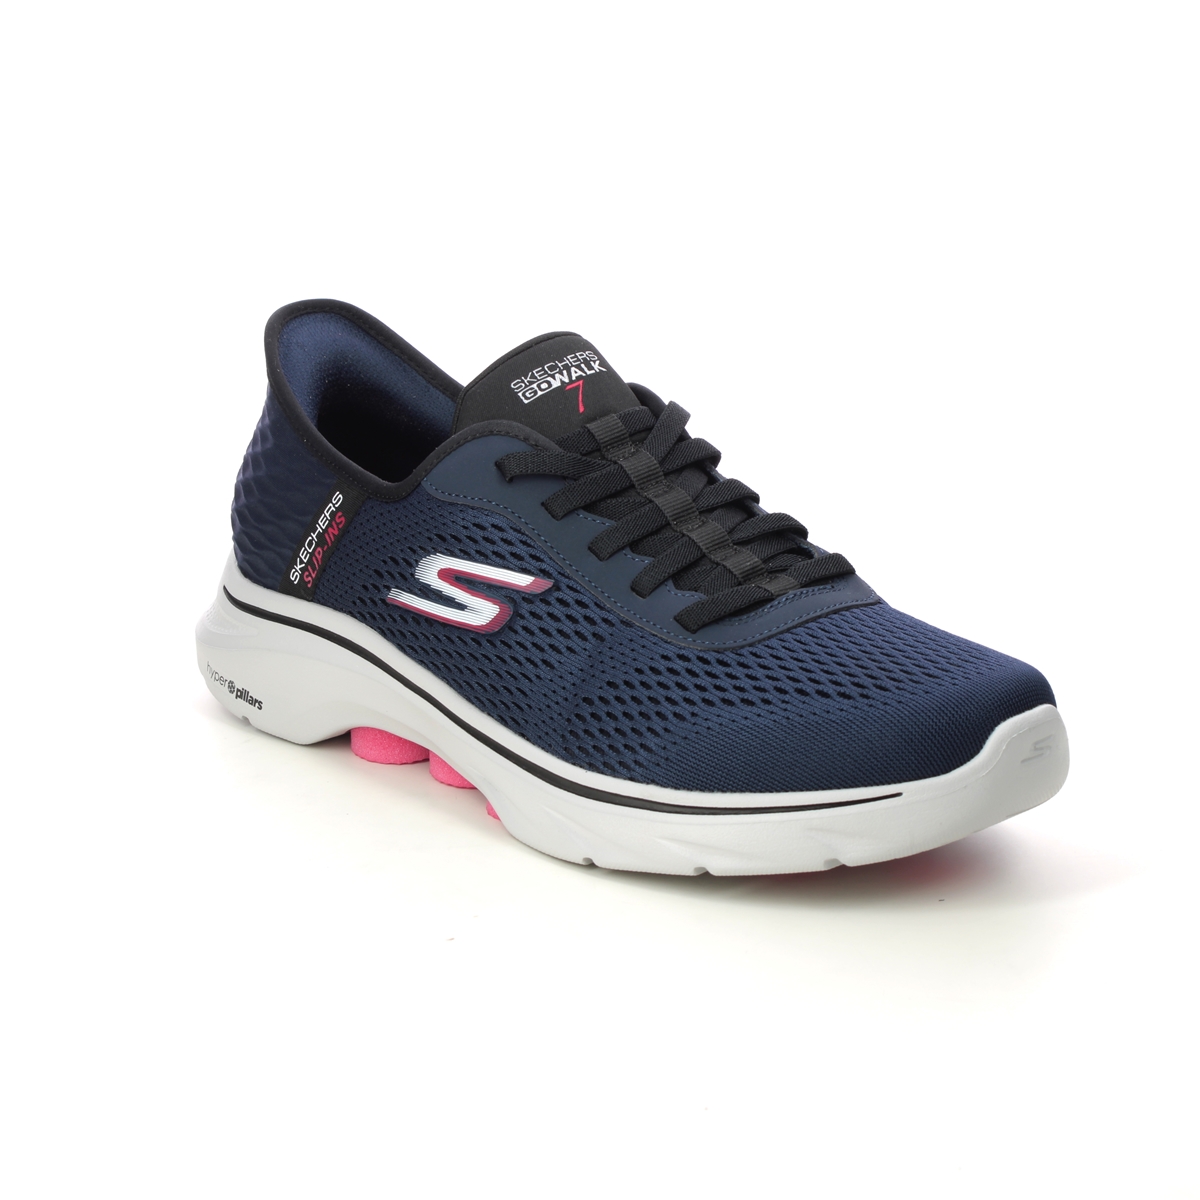 Skechers Slip Ins Go Walk 7 Bungee NVRD Navy Red Mens trainers 216648 in a Plain Textile in Size 11